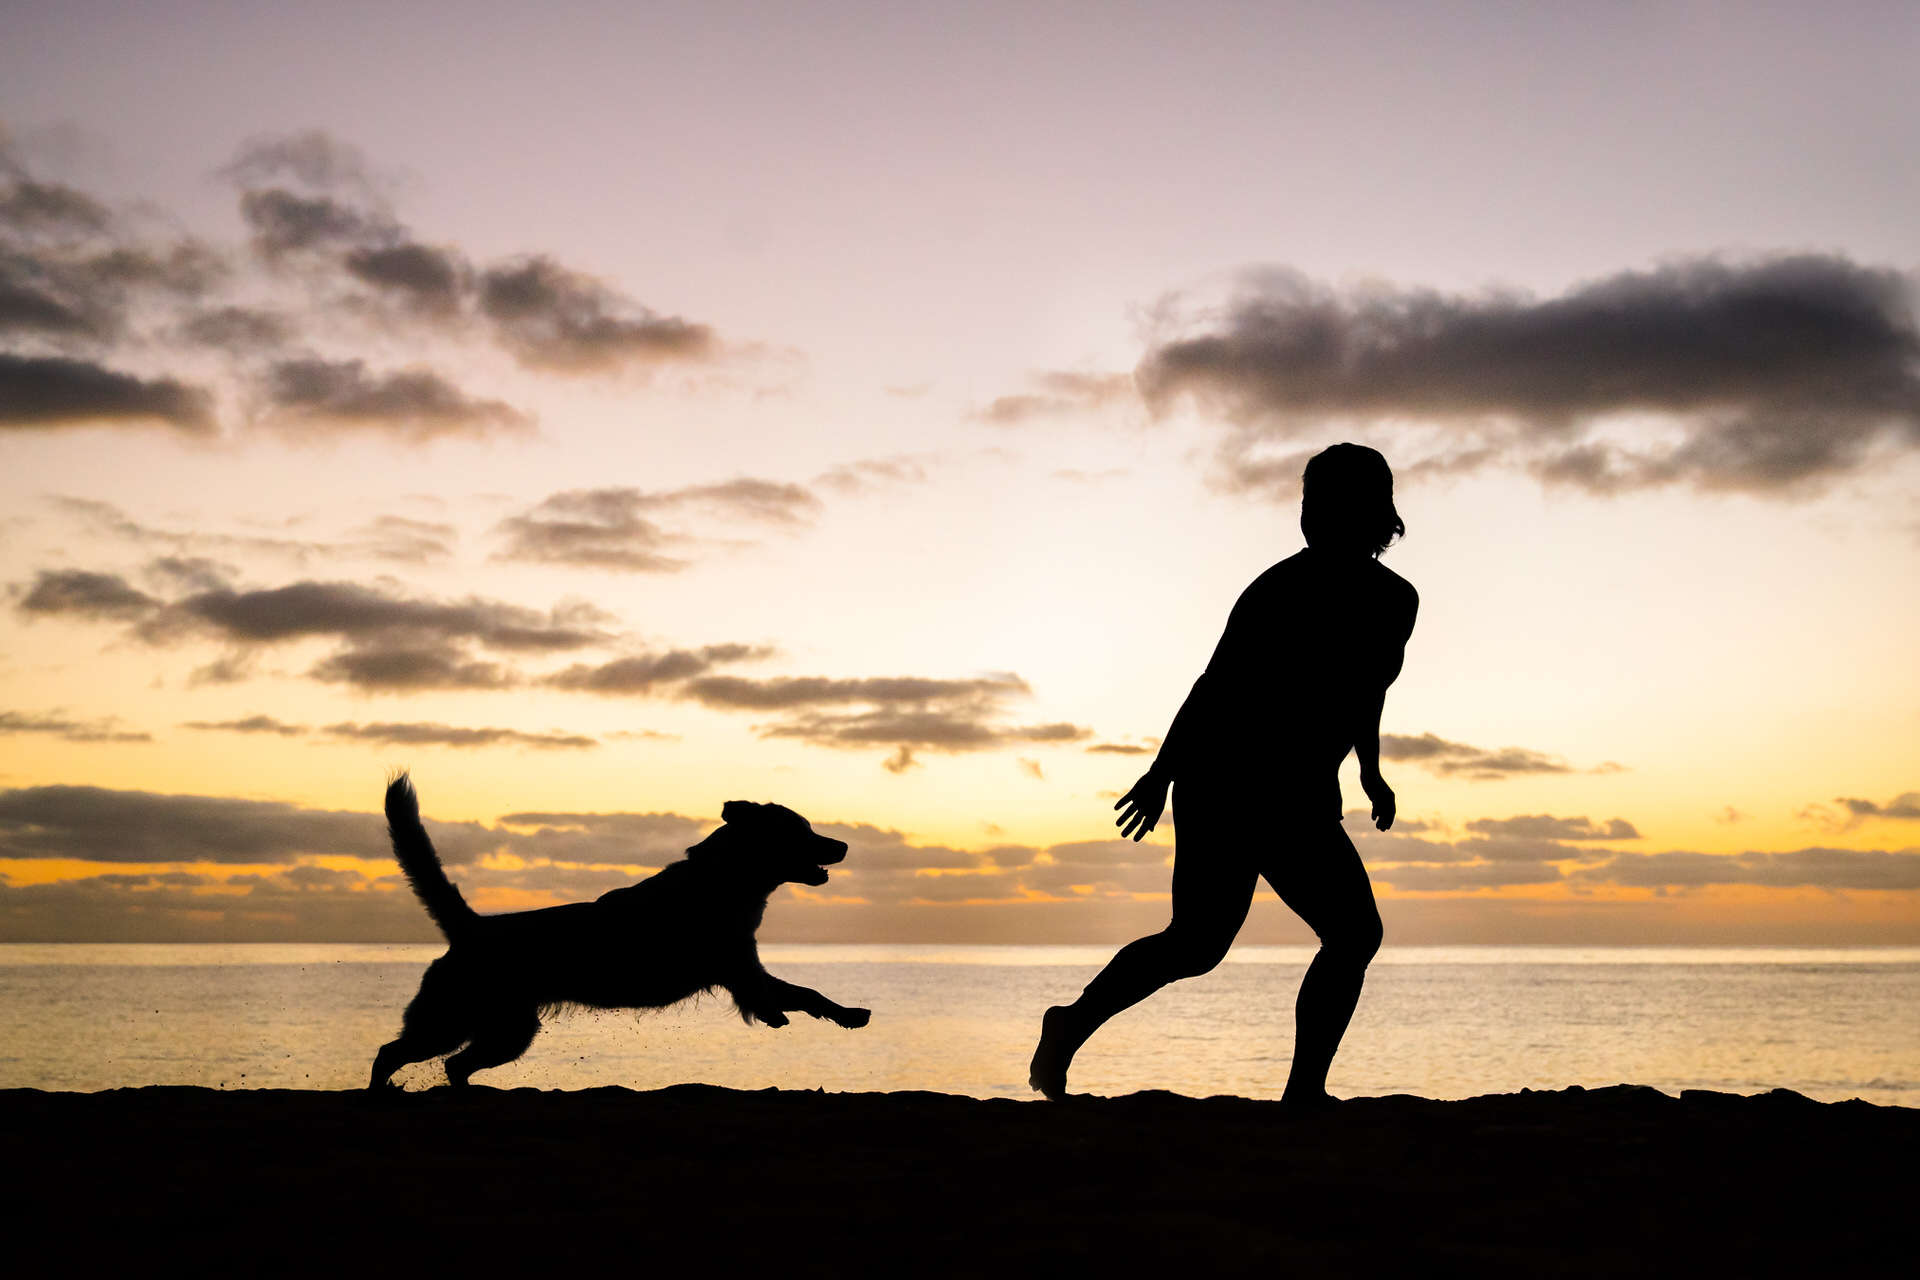 Person and dog silhouette playing at sunset